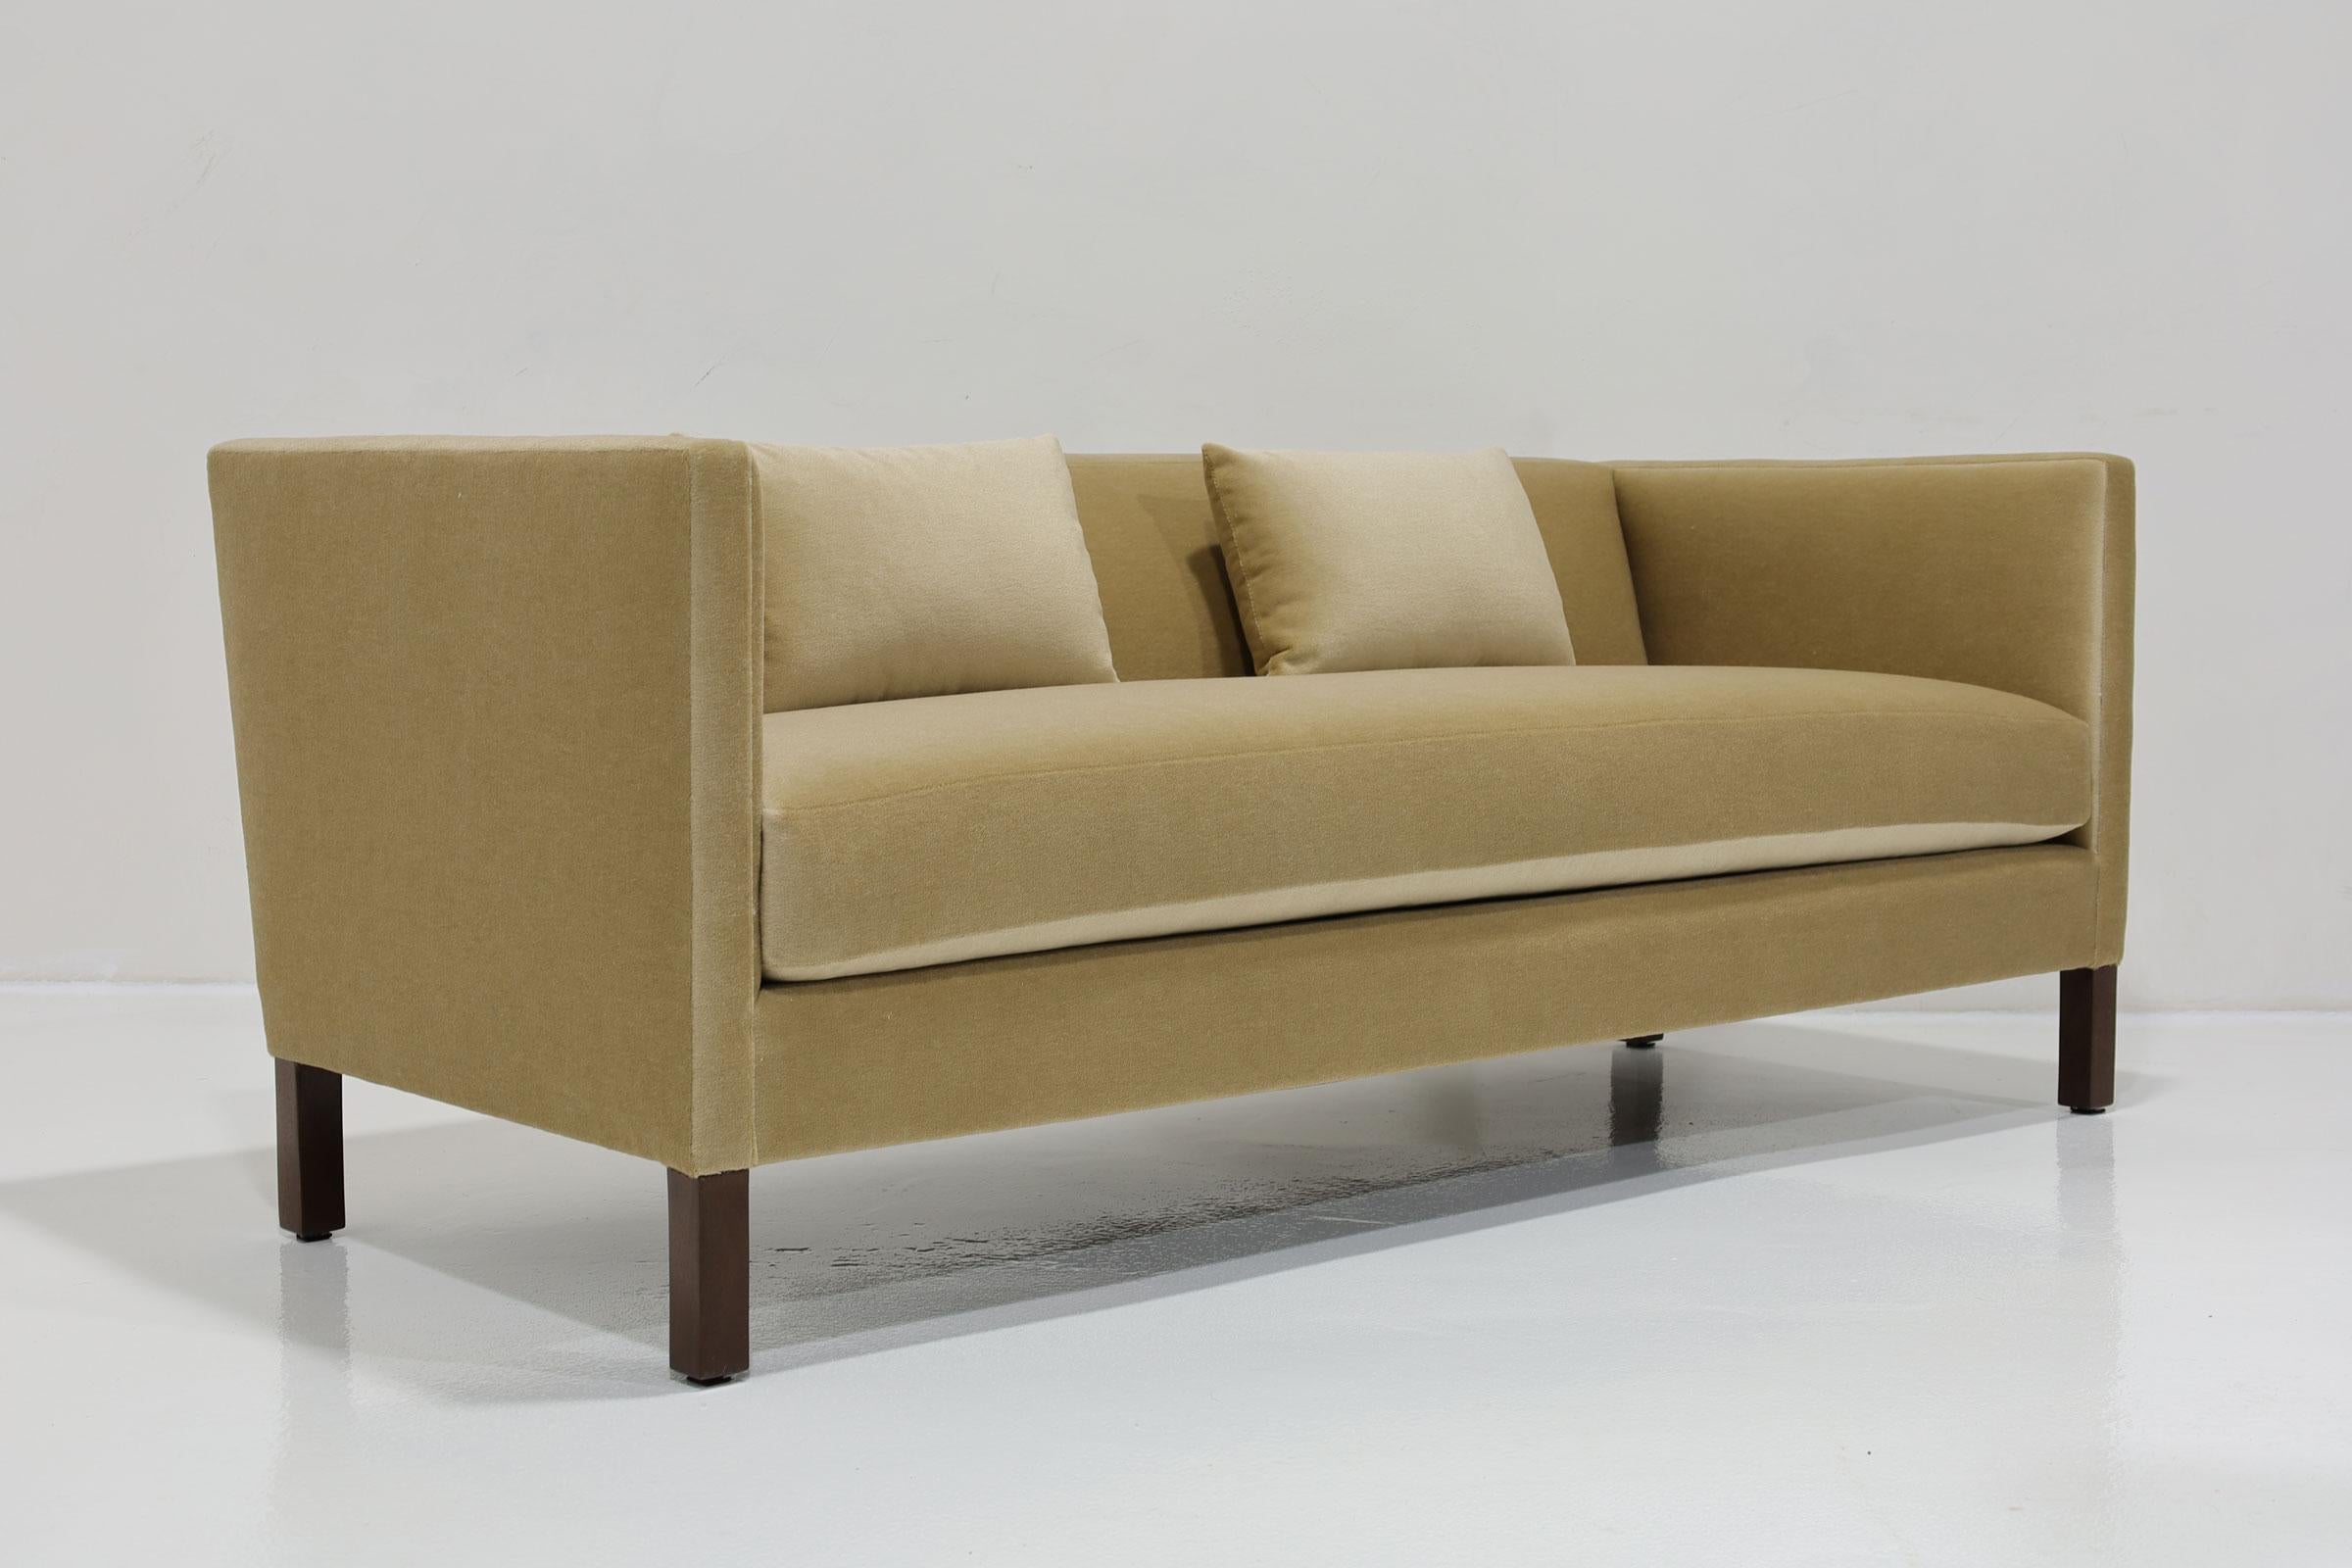 A classic clean lined sofa by Edward Wormley for Dunbar. We have updated with Great Plains Mohair by Holly Hunt.